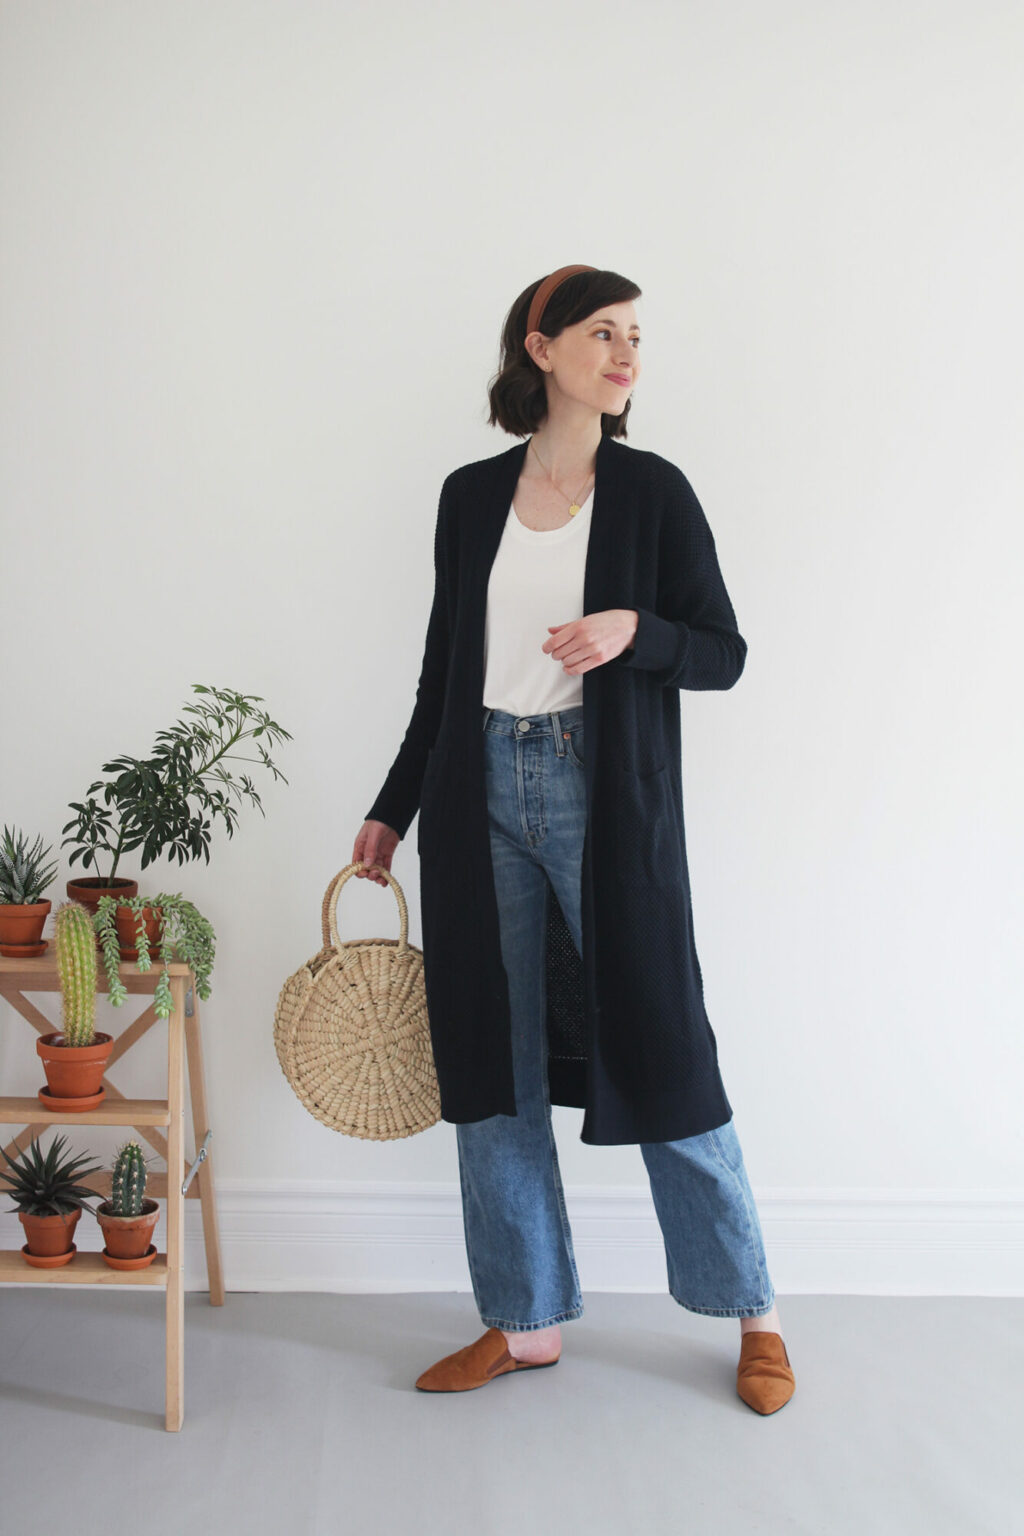 STYLING THE NEVA LONG CARDIGAN BY ABLE